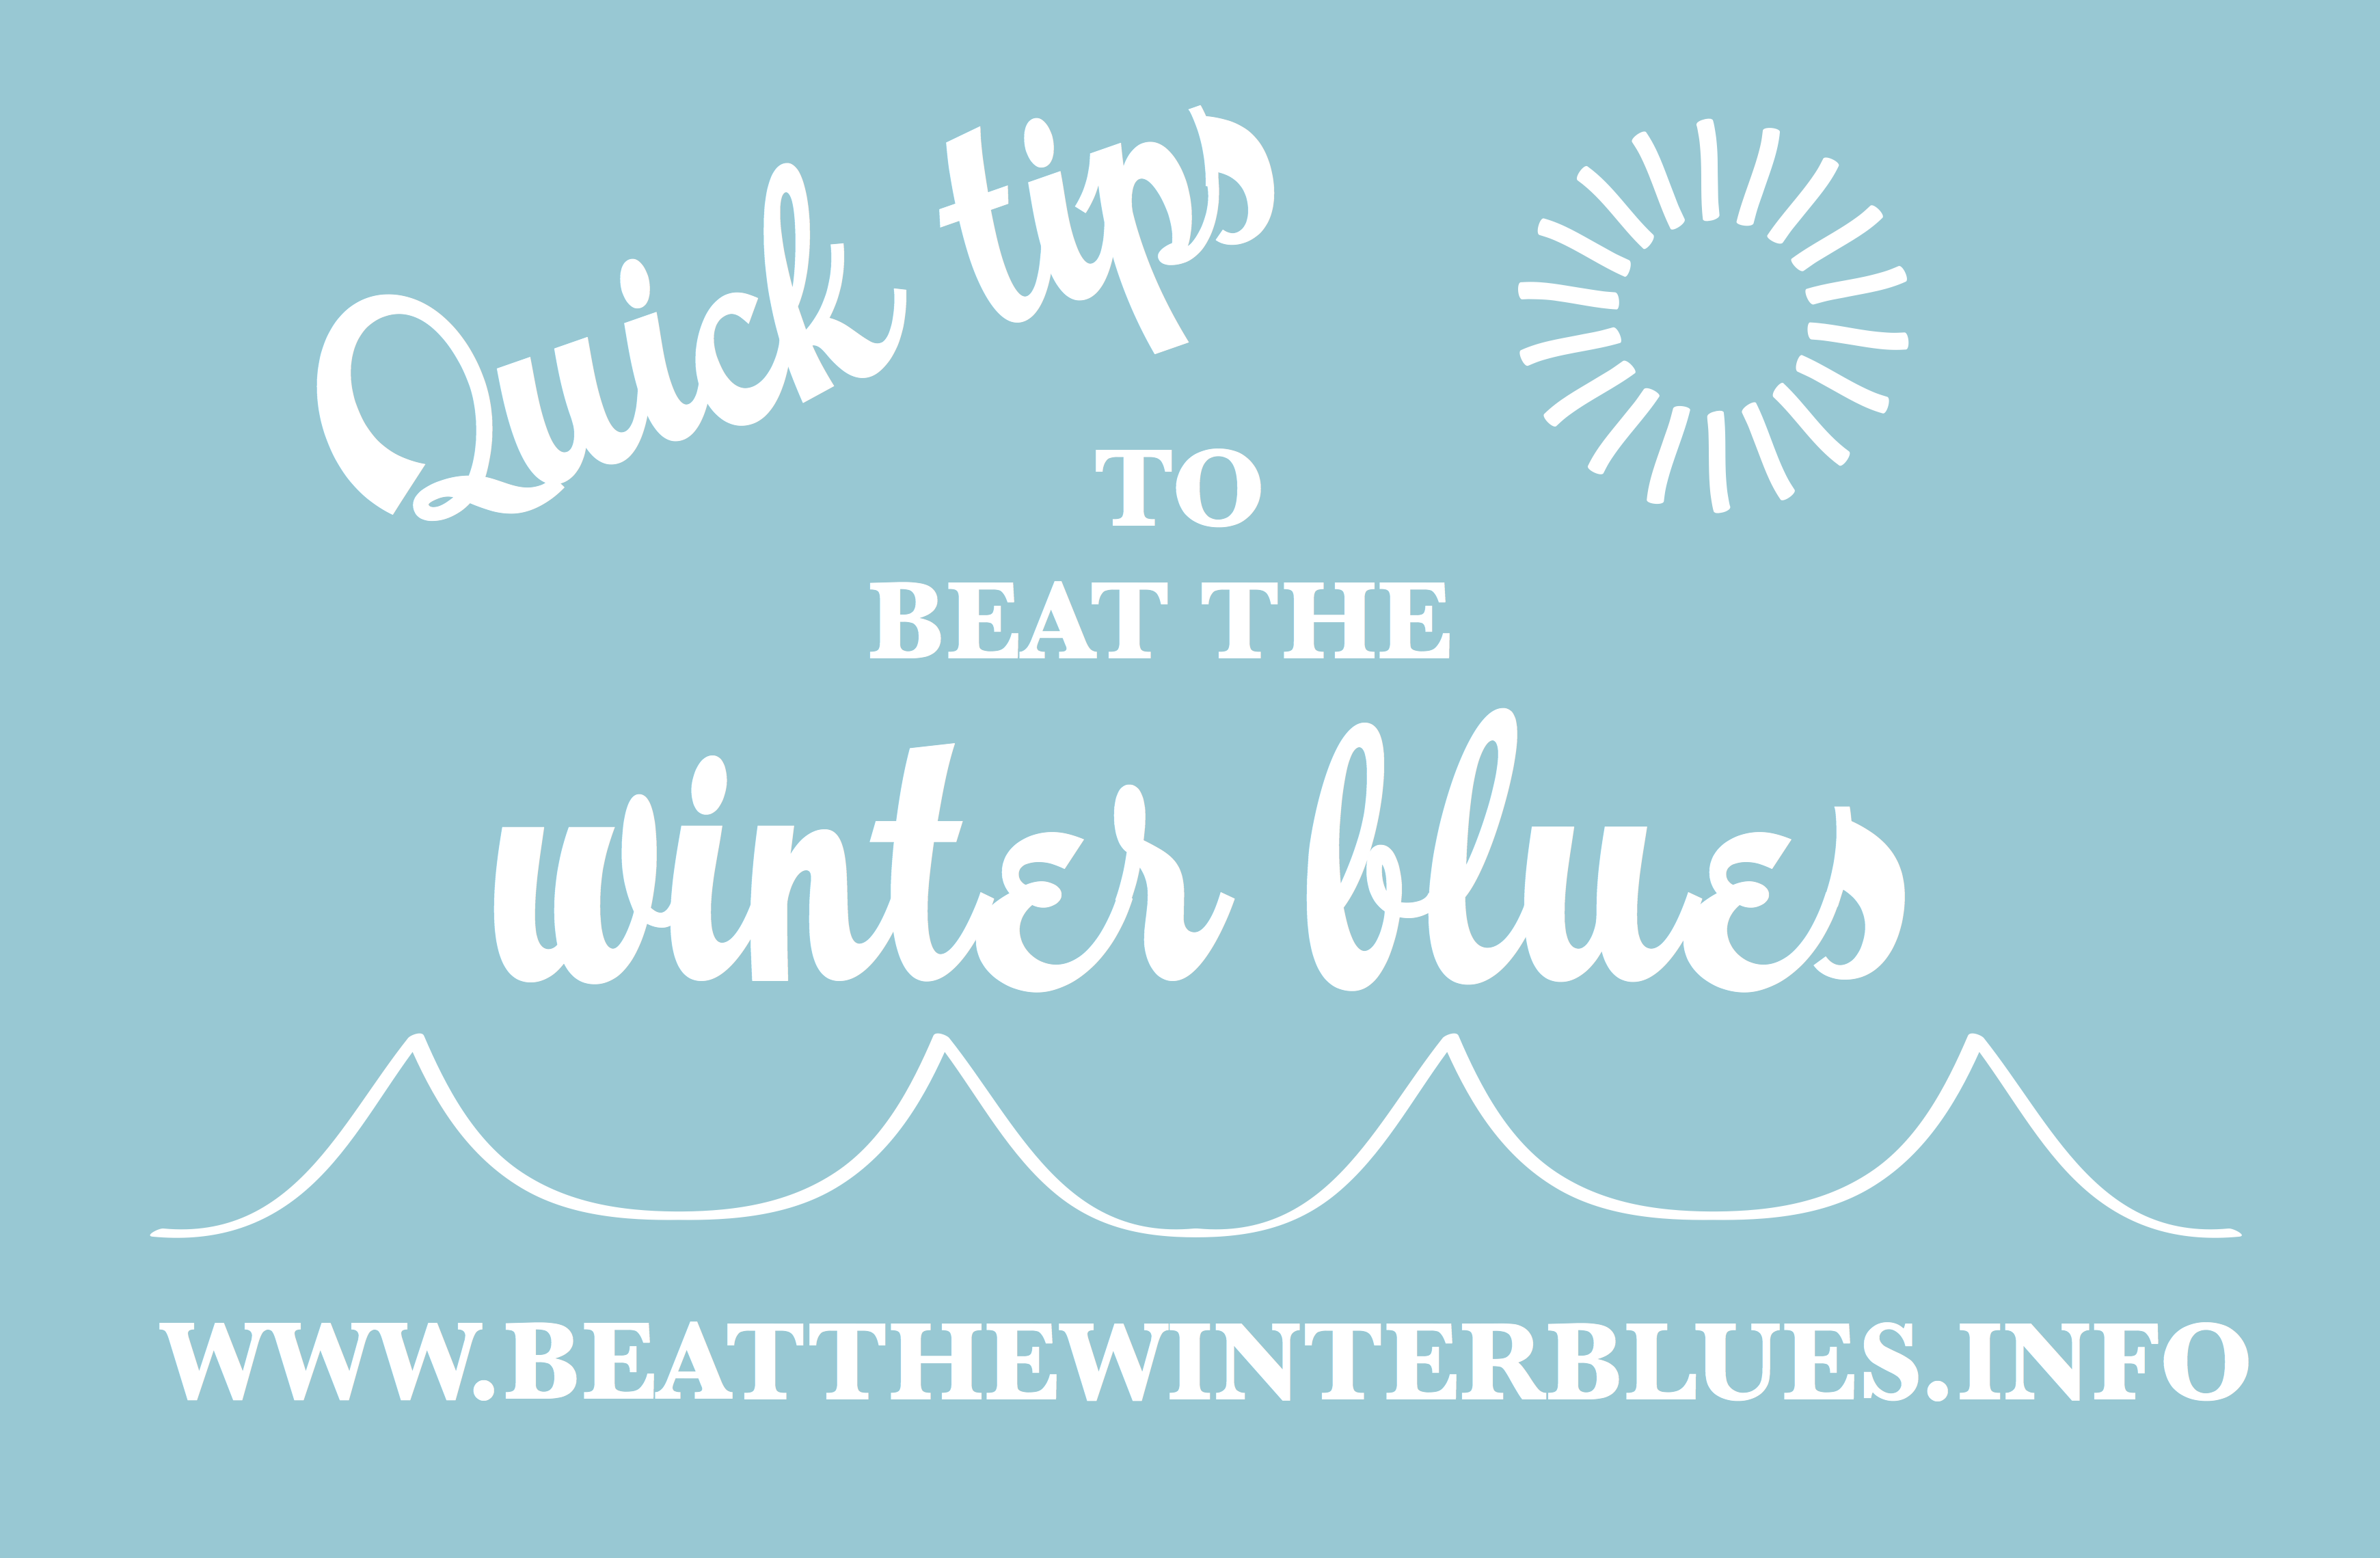 Quick tips to beat the winter blues